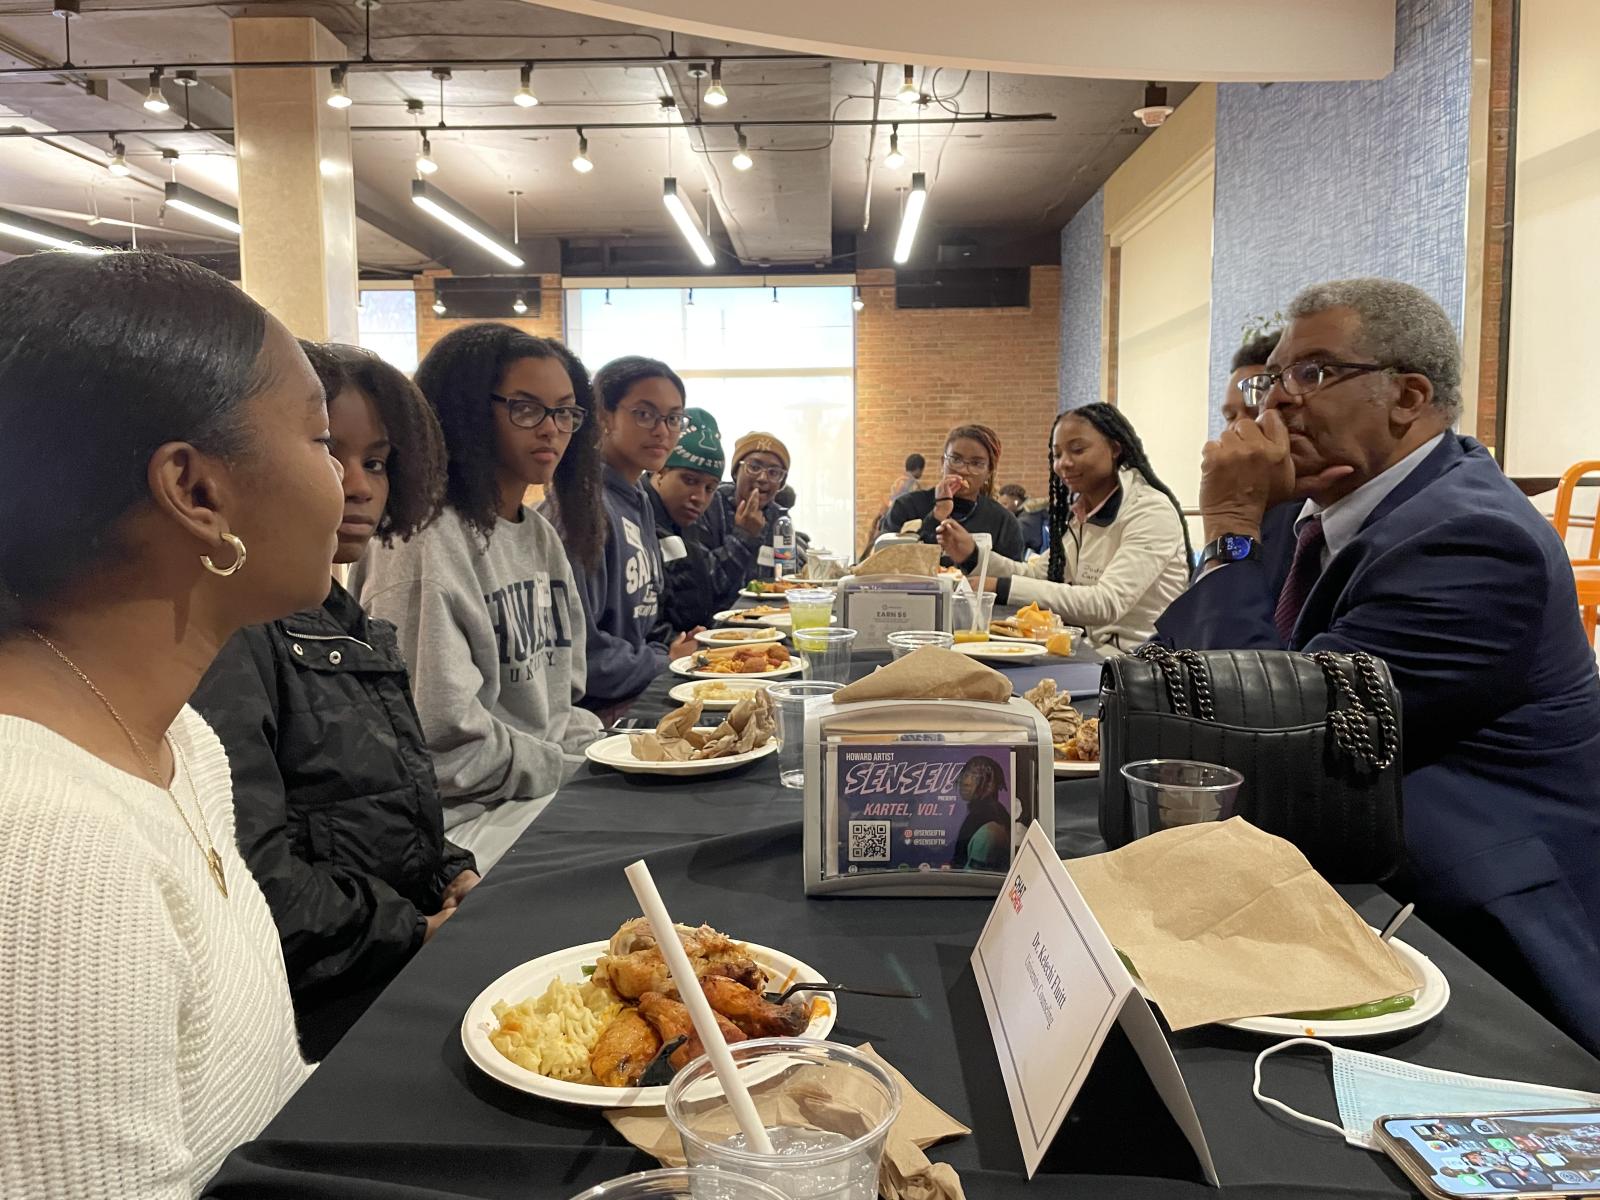 Students dining with administrators